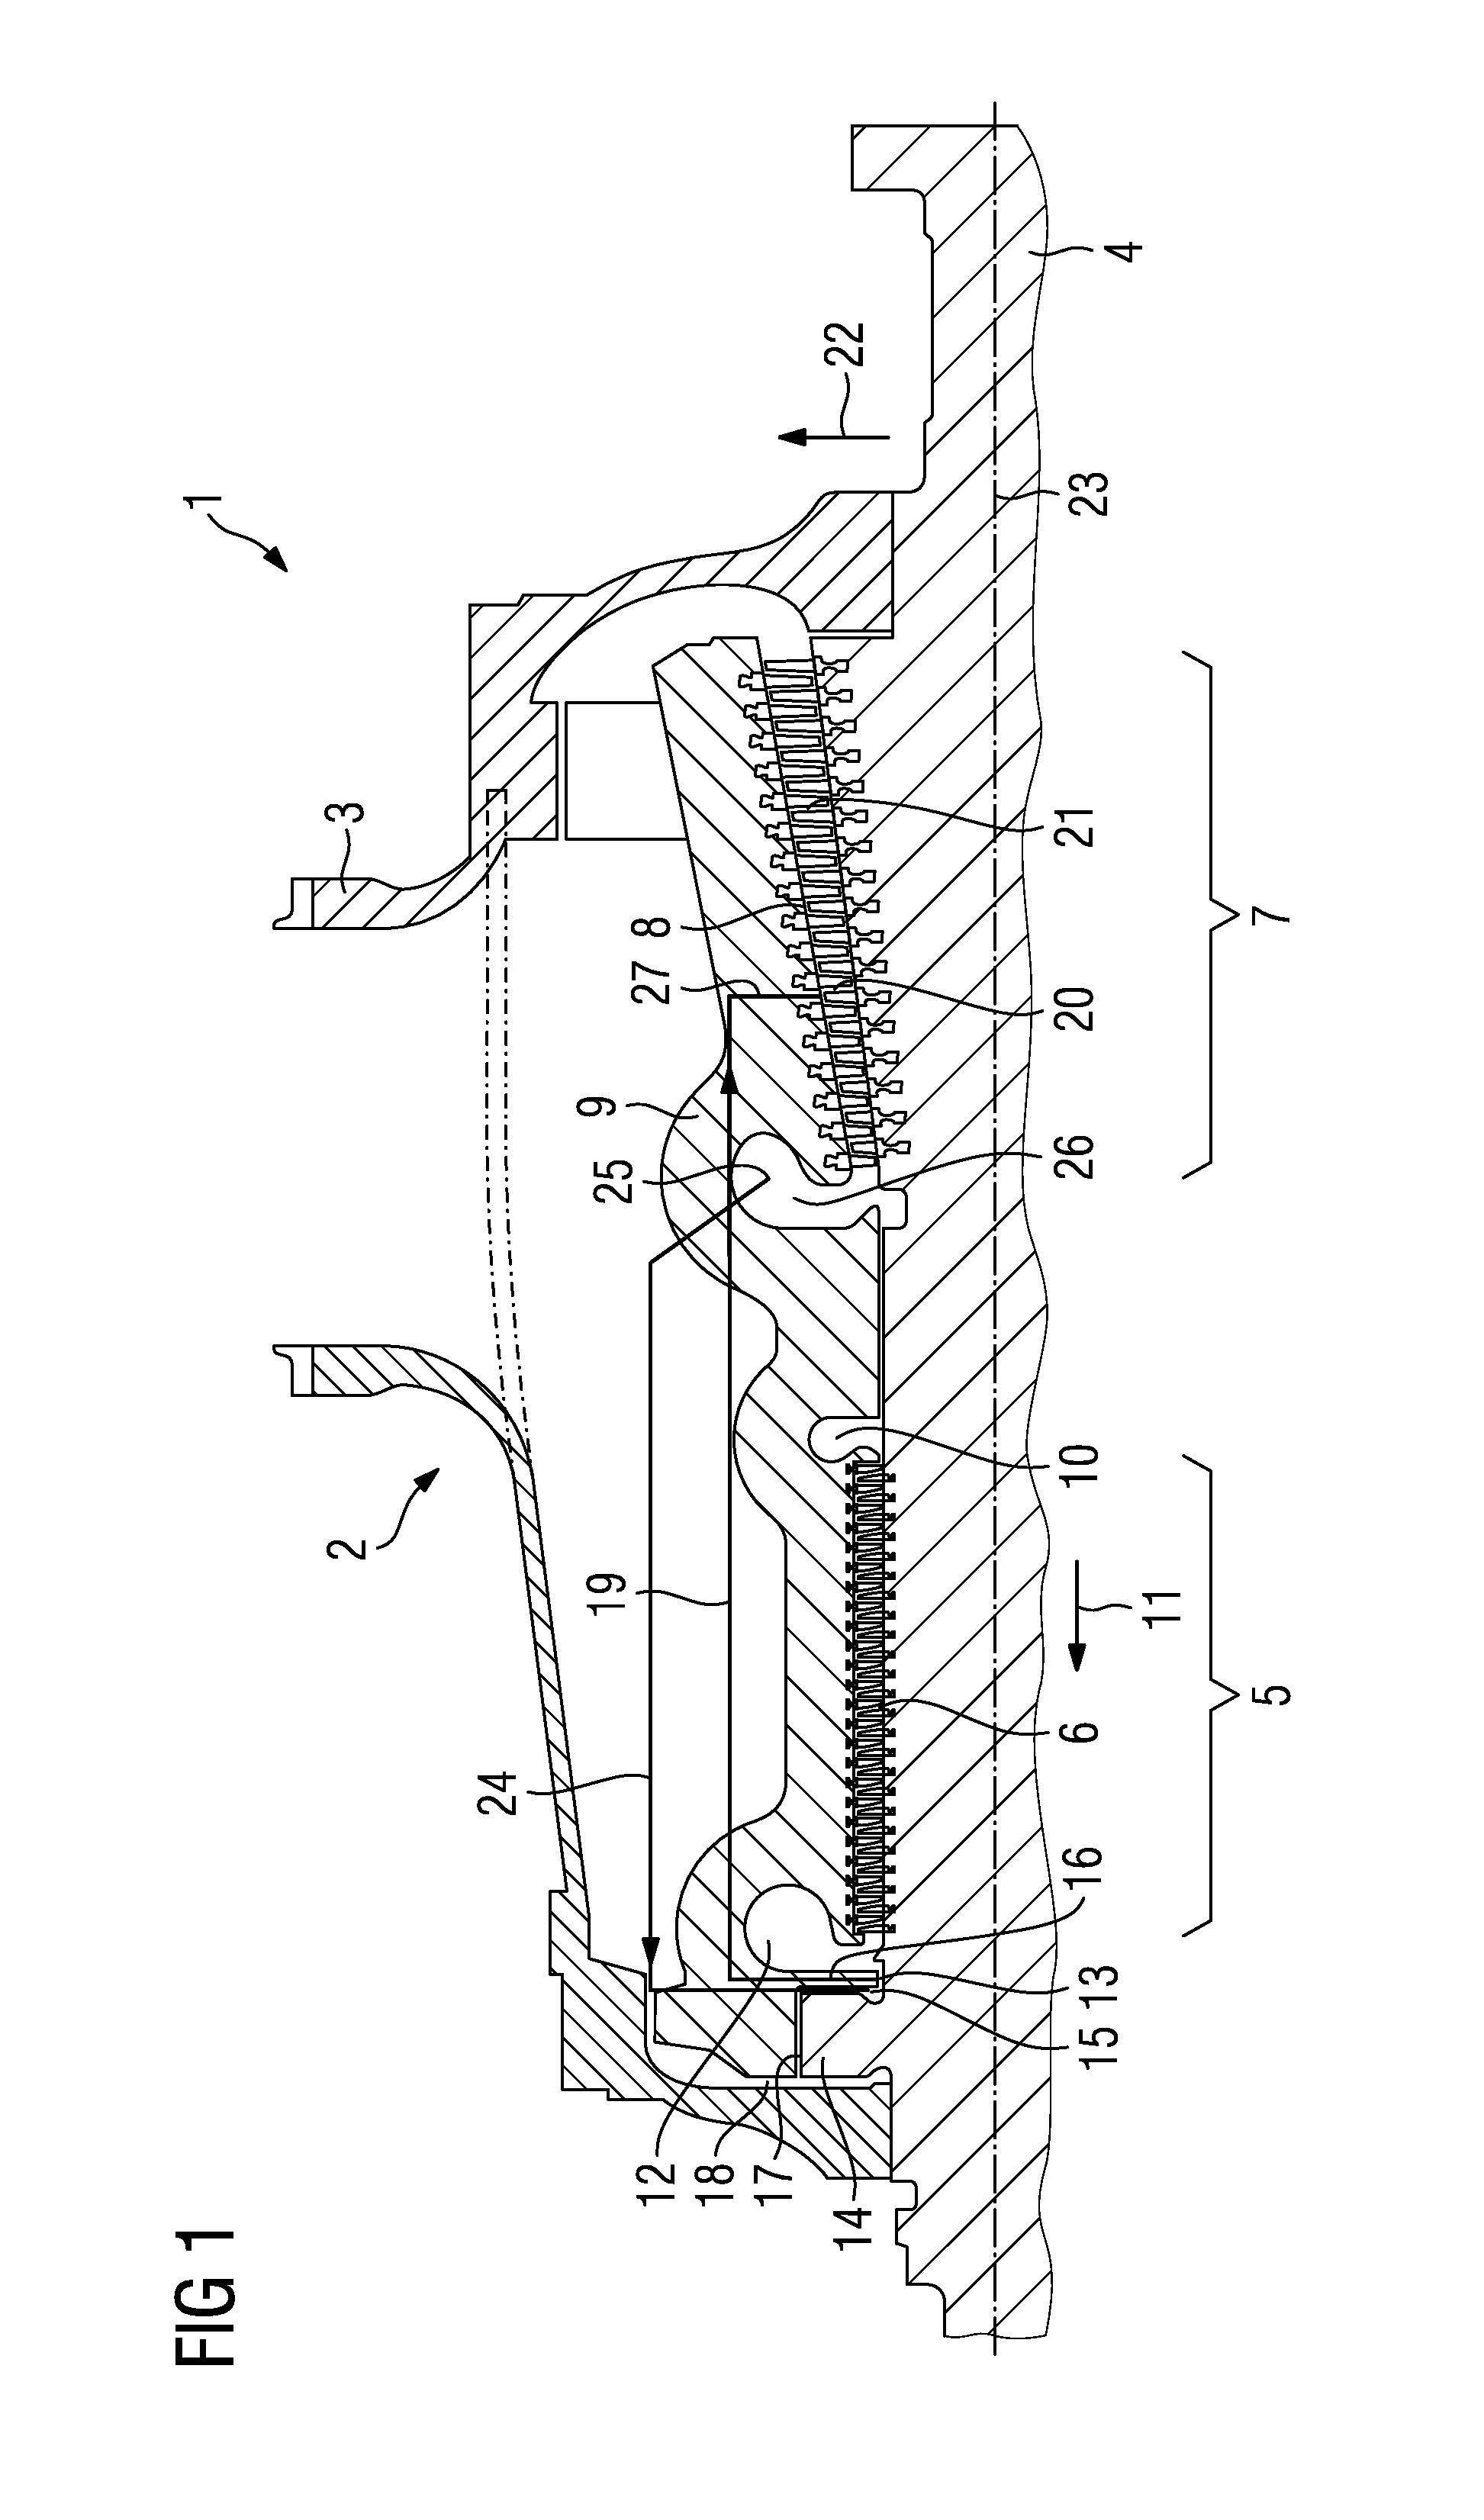 Disabling circuit in steam turbines for shutting off saturated steam